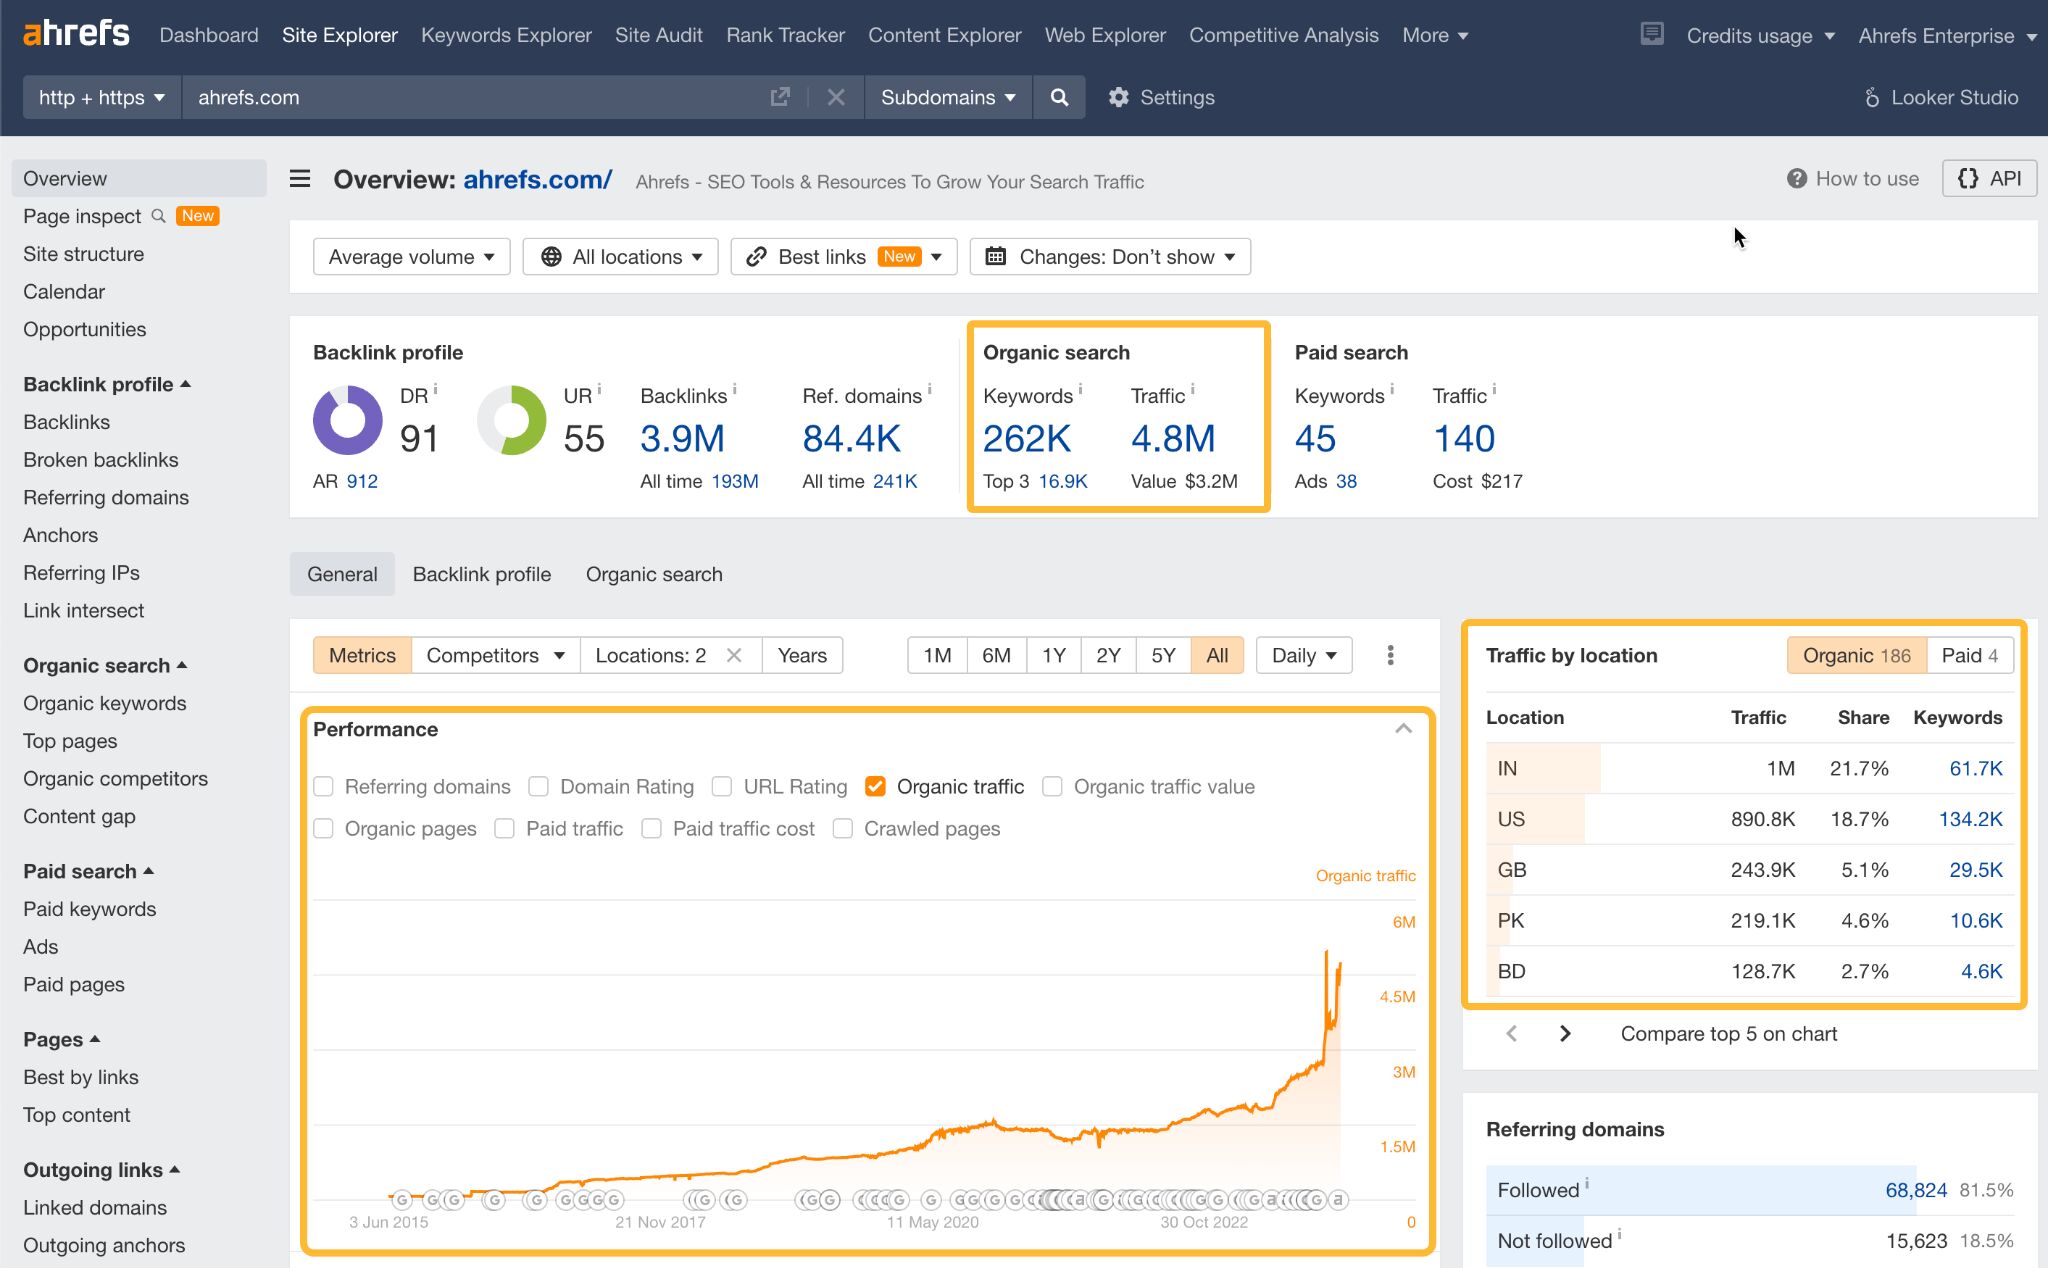 How to get organic traffic data in Ahrefs.